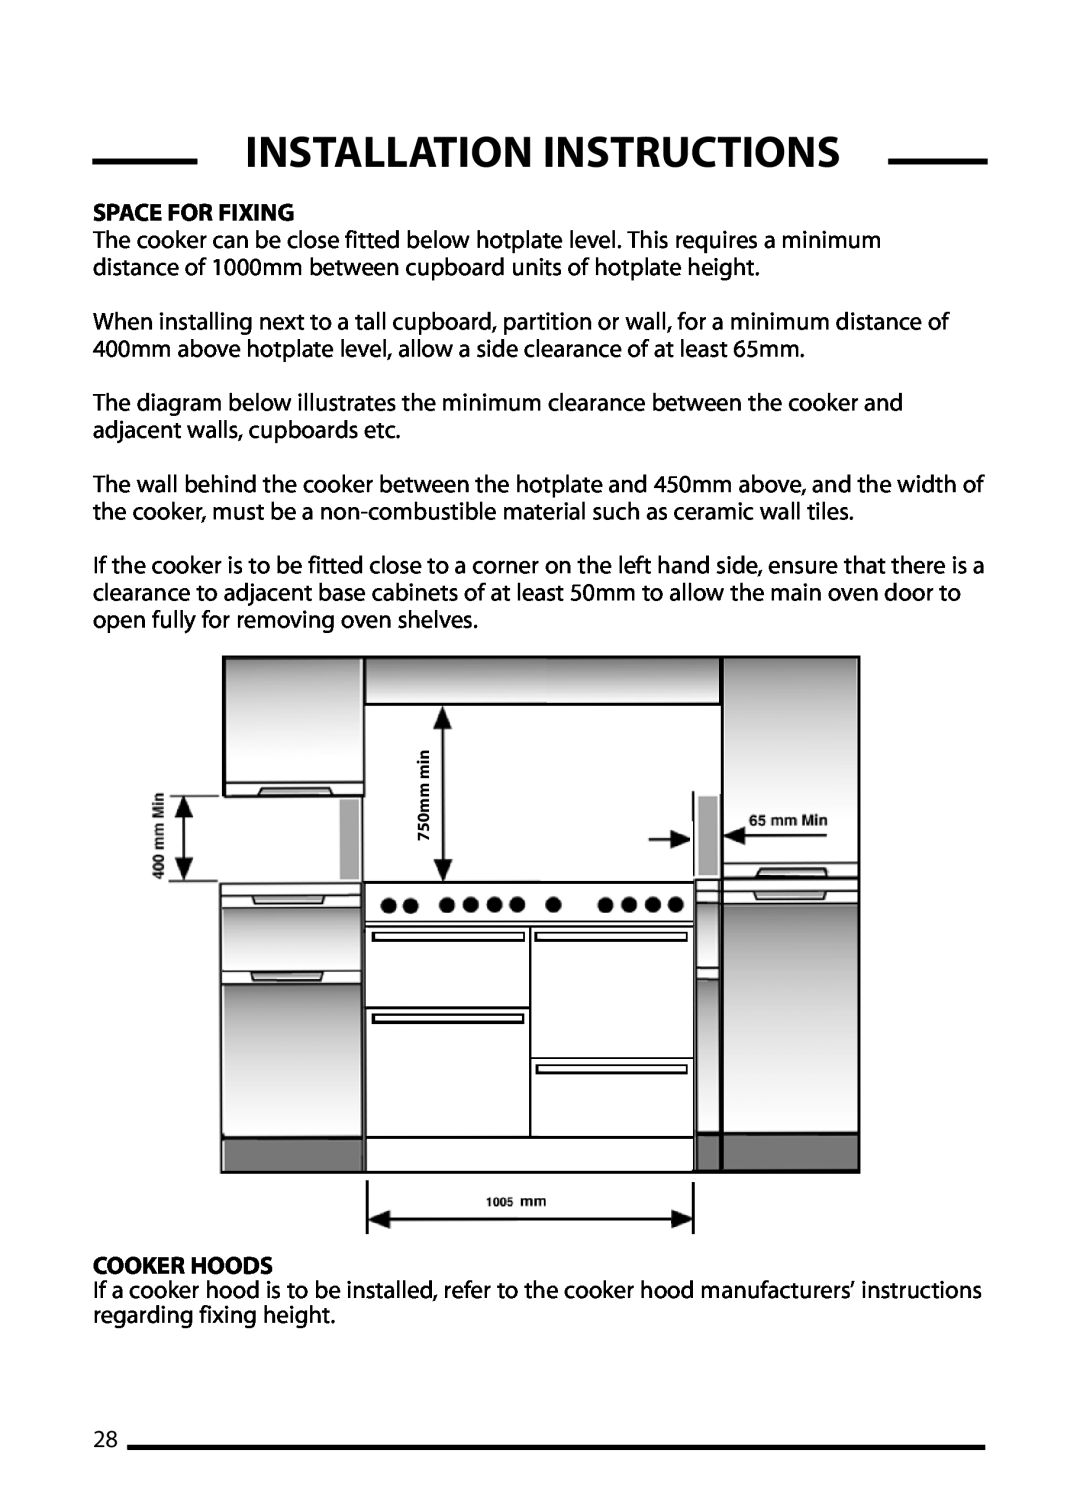 Cannon 10850G, 10855G, 10856G installation instructions Installation Instructions, Space For Fixing, Cooker Hoods, 750mm min 